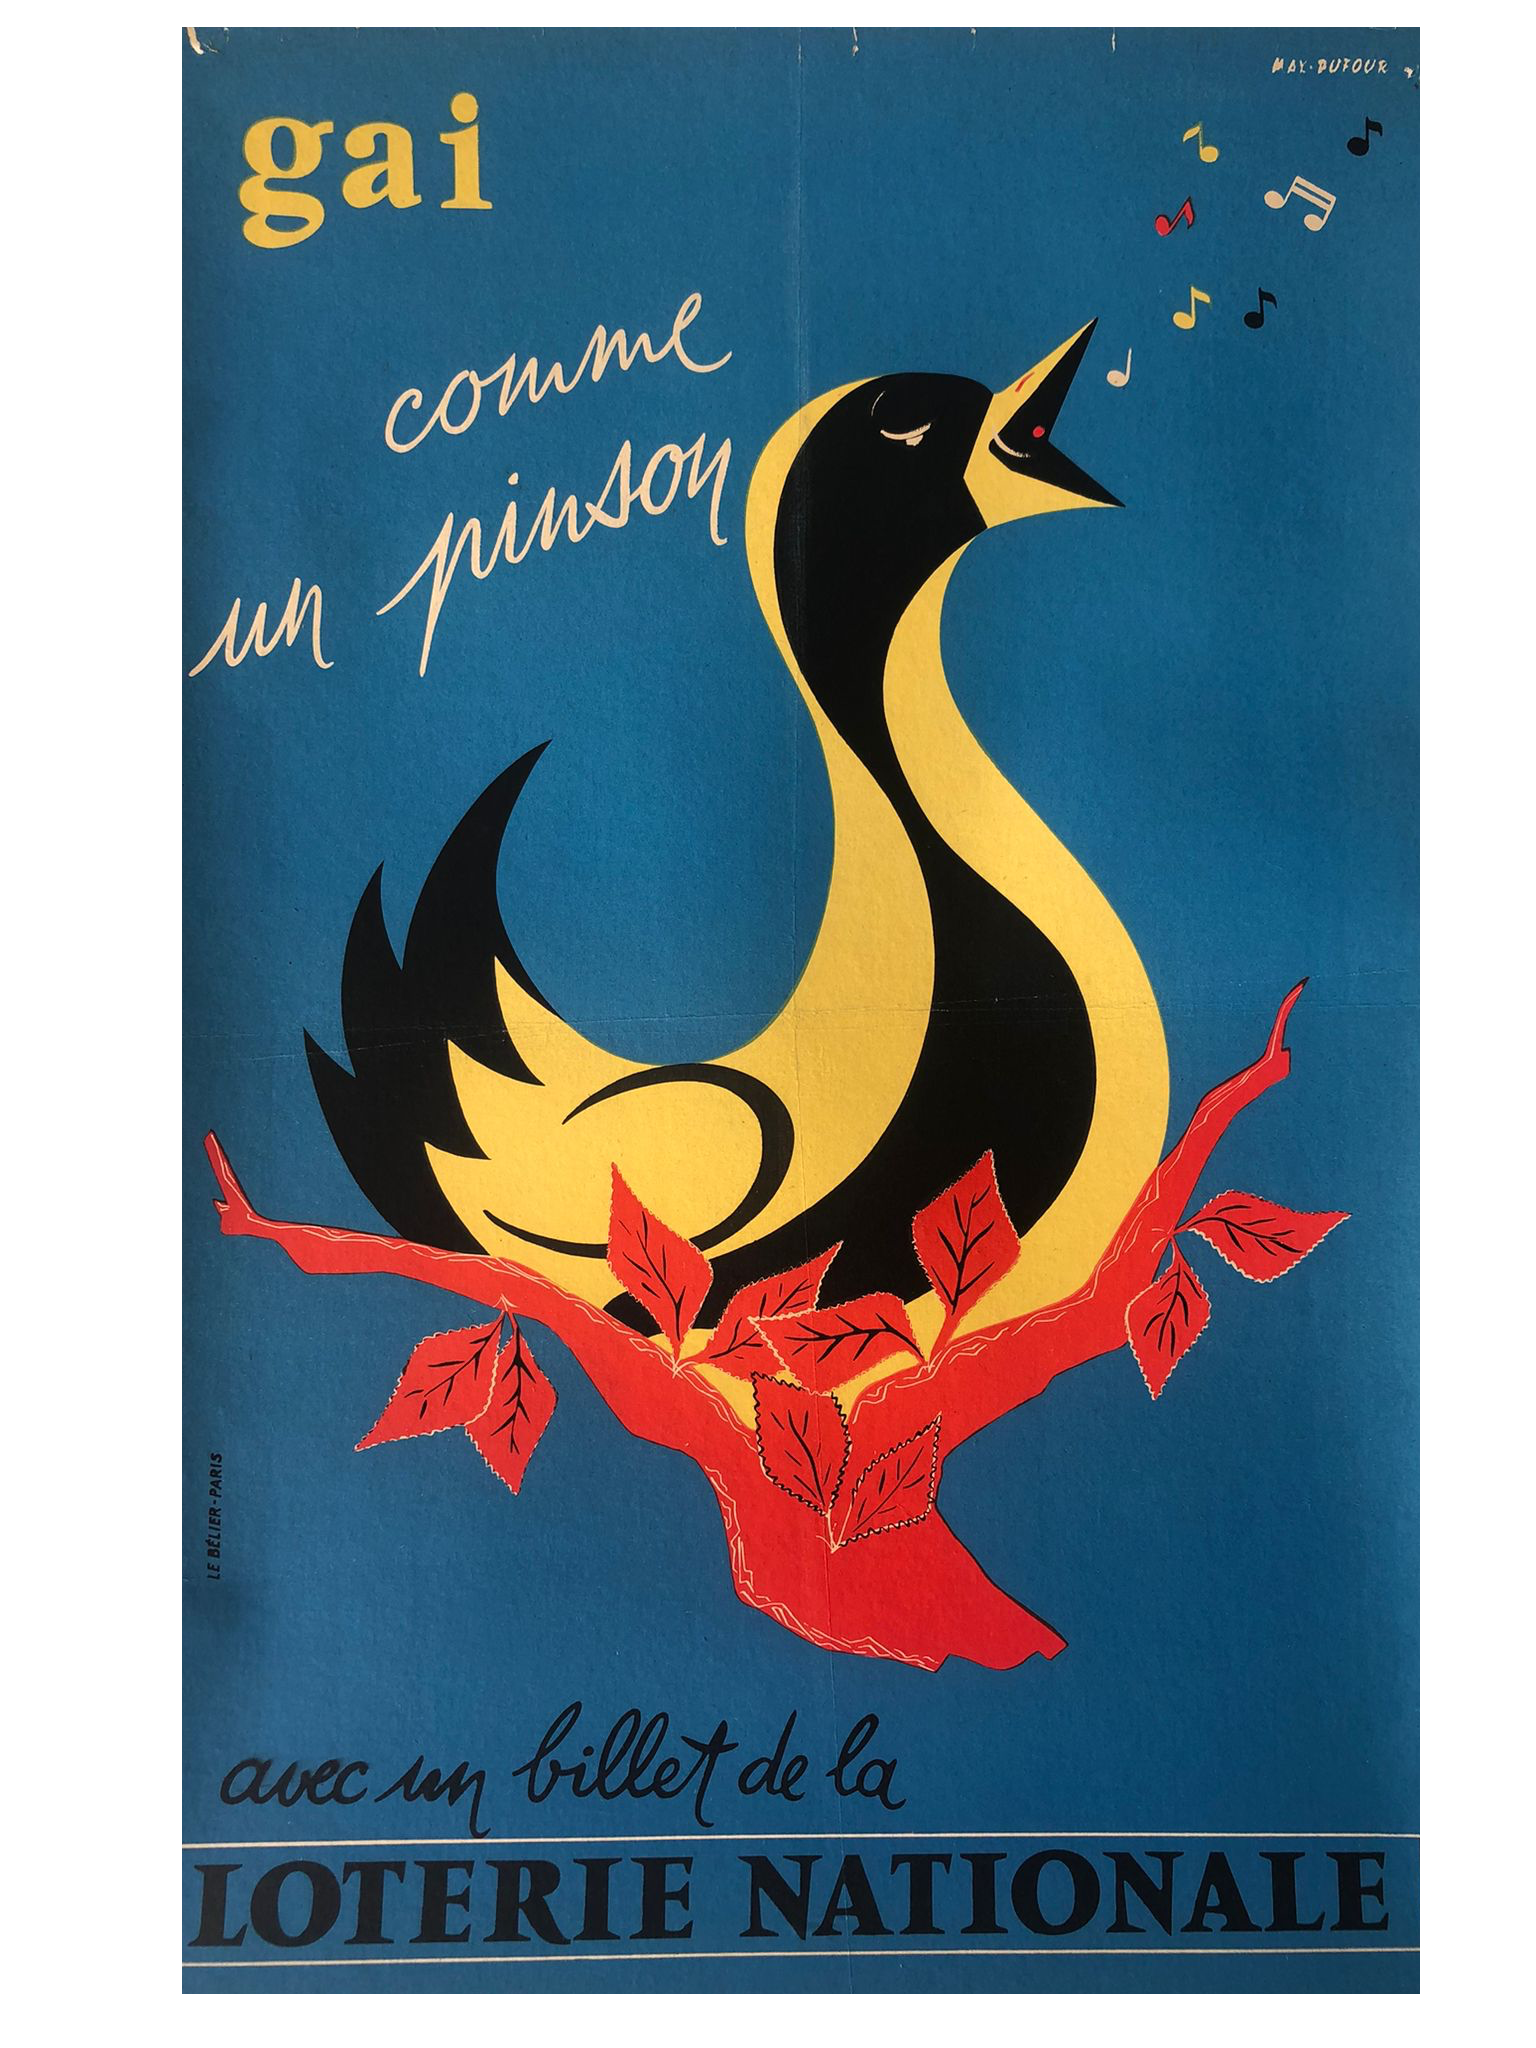 Loterie National Duck Poster by Max Dufour